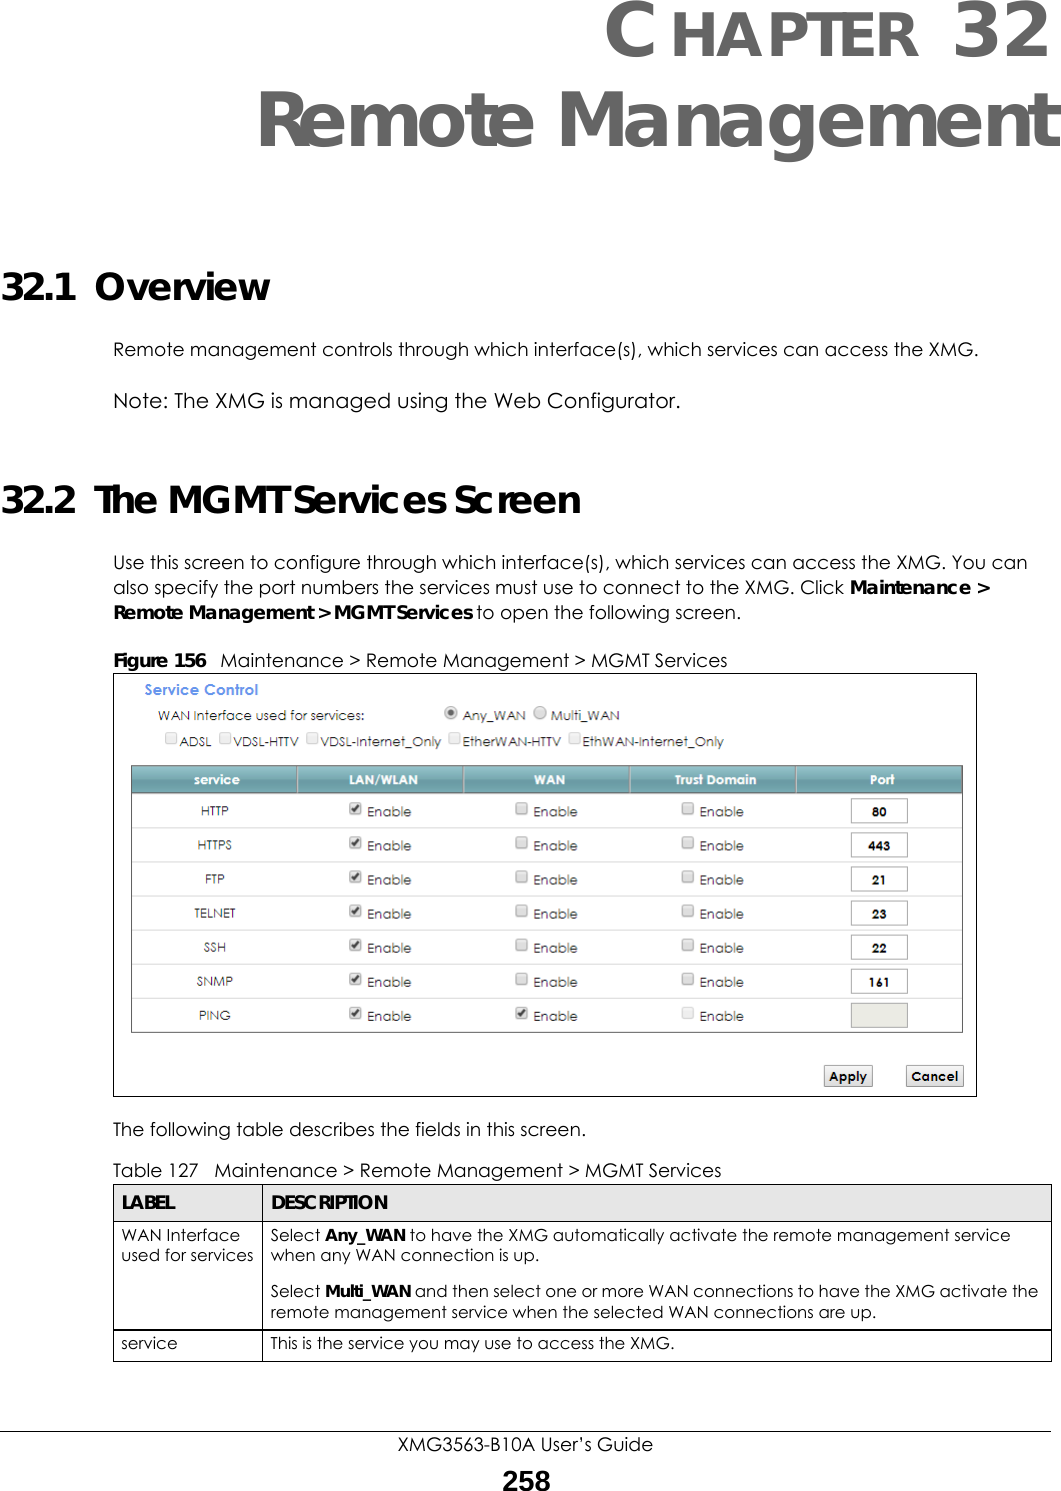 XMG3563-B10A User’s Guide258CHAPTER 32Remote Management32.1  OverviewRemote management controls through which interface(s), which services can access the XMG. Note: The XMG is managed using the Web Configurator.32.2  The MGMT Services ScreenUse this screen to configure through which interface(s), which services can access the XMG. You can also specify the port numbers the services must use to connect to the XMG. Click Maintenance &gt; Remote Management &gt; MGMT Services to open the following screen. Figure 156   Maintenance &gt; Remote Management &gt; MGMT Services The following table describes the fields in this screen. Table 127   Maintenance &gt; Remote Management &gt; MGMT ServicesLABEL DESCRIPTIONWAN Interface used for servicesSelect Any_WAN to have the XMG automatically activate the remote management service when any WAN connection is up.Select Multi_WAN and then select one or more WAN connections to have the XMG activate the remote management service when the selected WAN connections are up.service This is the service you may use to access the XMG.